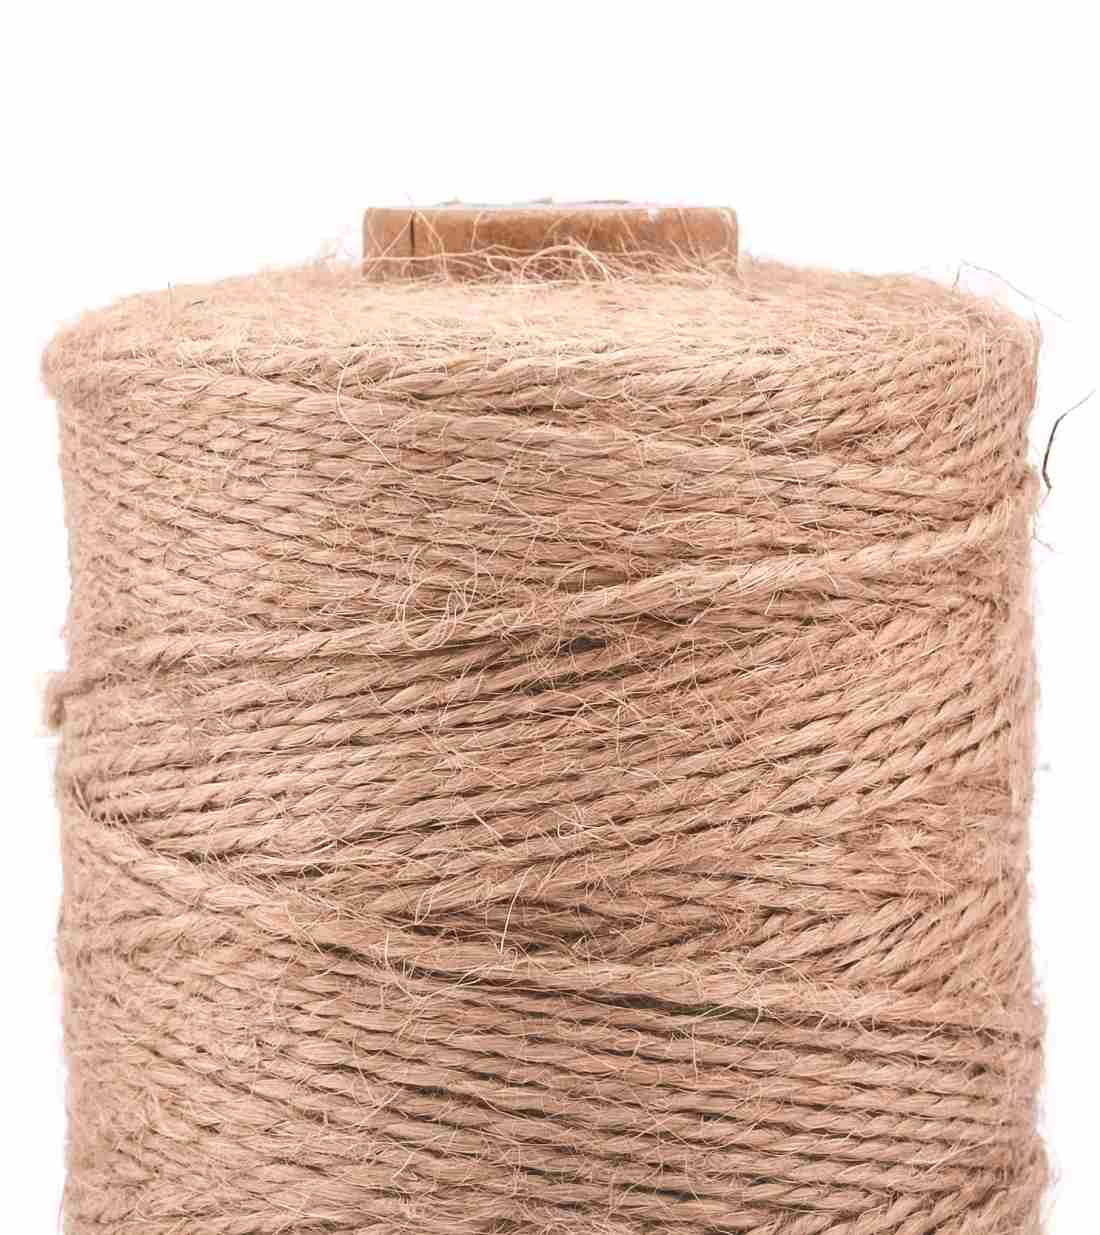 NSB01 Jute Twine String 250 mtr 2 Ply Strong Thick Jute Rope 820 feet 2 Ply  Thick and Strong for Craft and Grossery - Jute Twine String 250 mtr 2 Ply  Strong